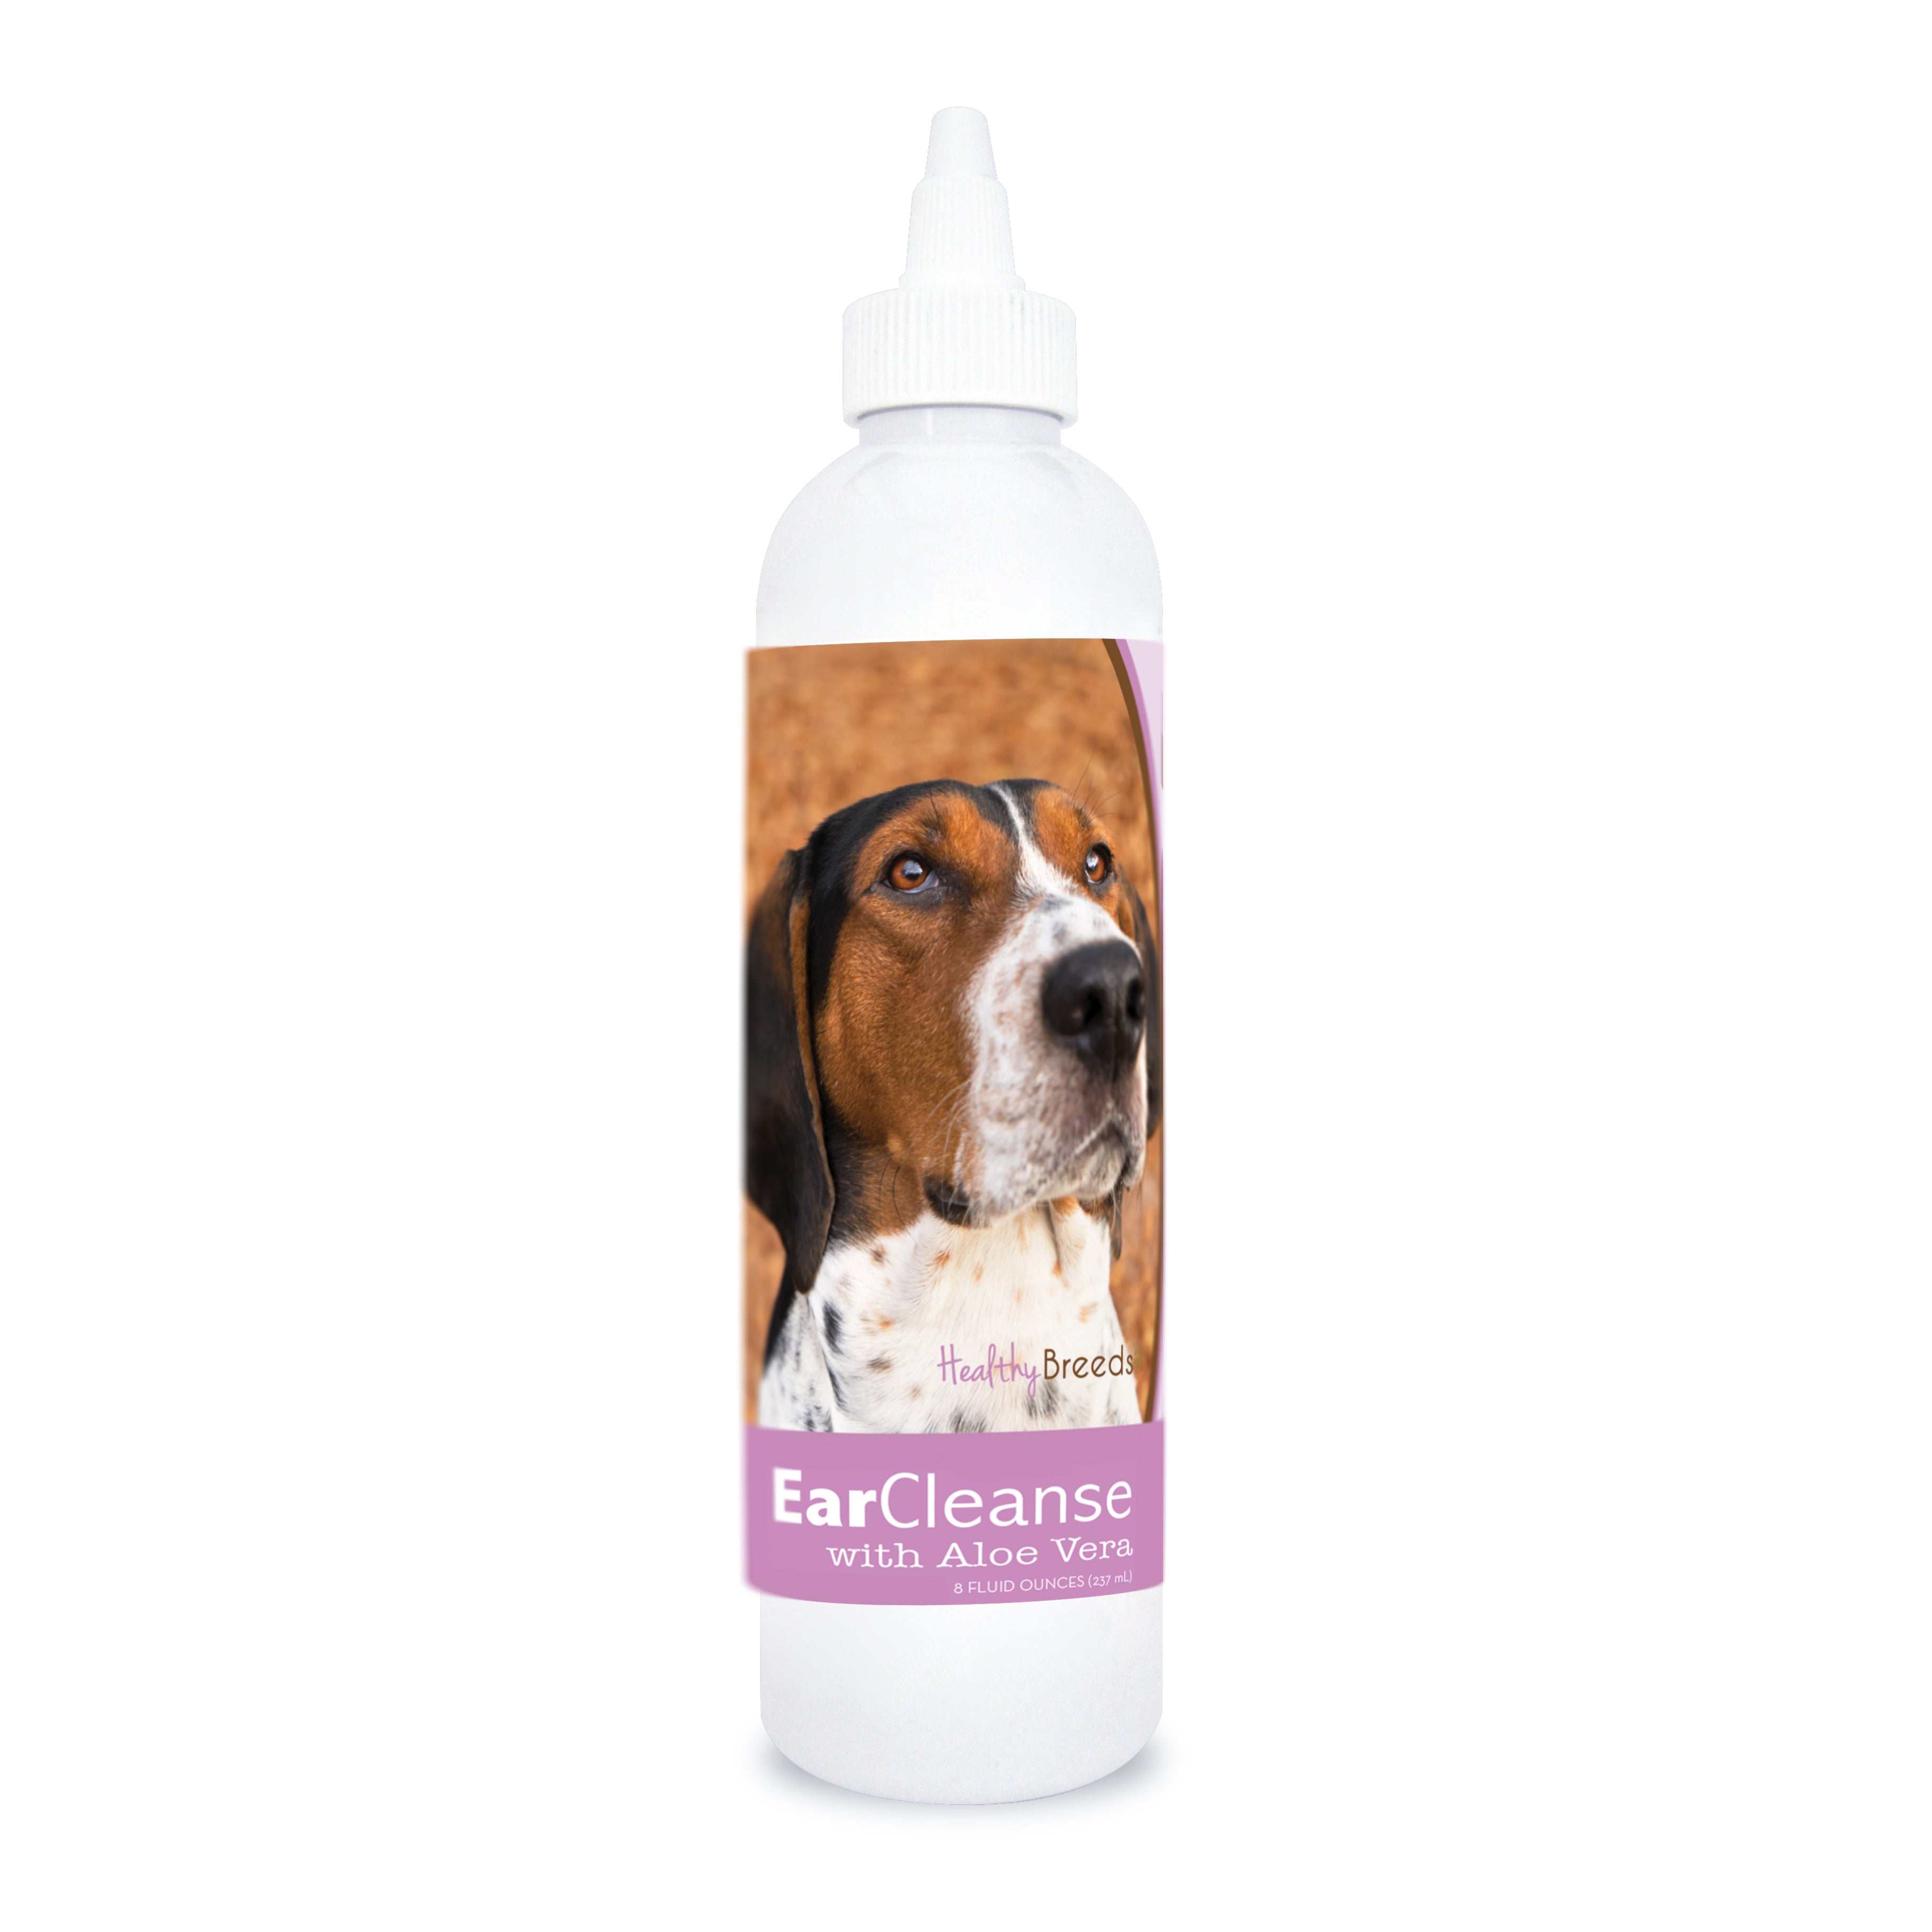 Treeing Walker Coonhound Ear Cleanse with Aloe Vera Sweet Pea and Vanilla 8 oz